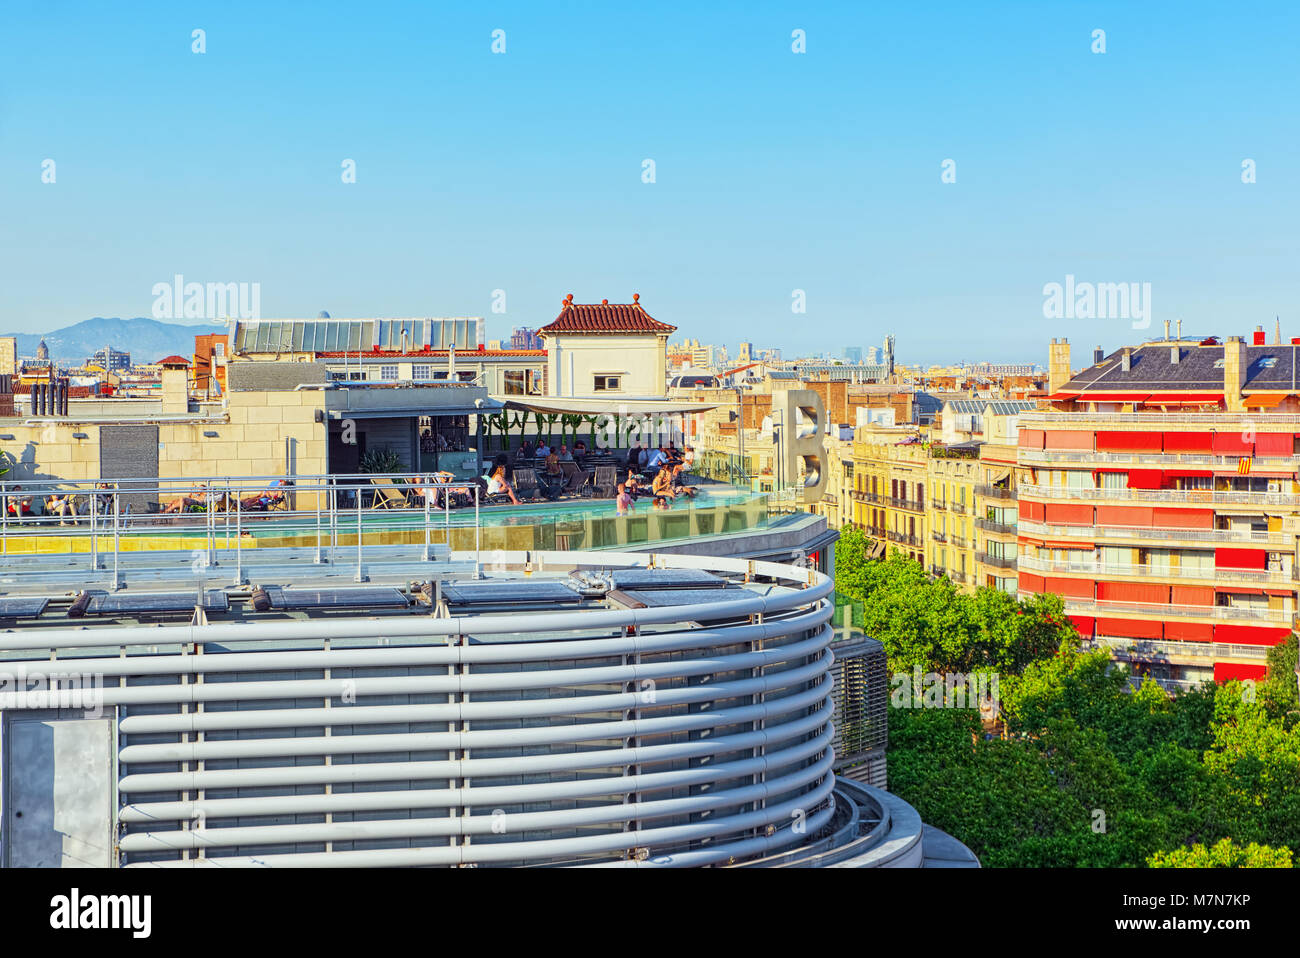 Barcelona, Spain - June 12, 2017 : Panorama on the urban center of Barcelona, the capital of the Autonomy of Catalonia. Pool on the roof with people. Stock Photo